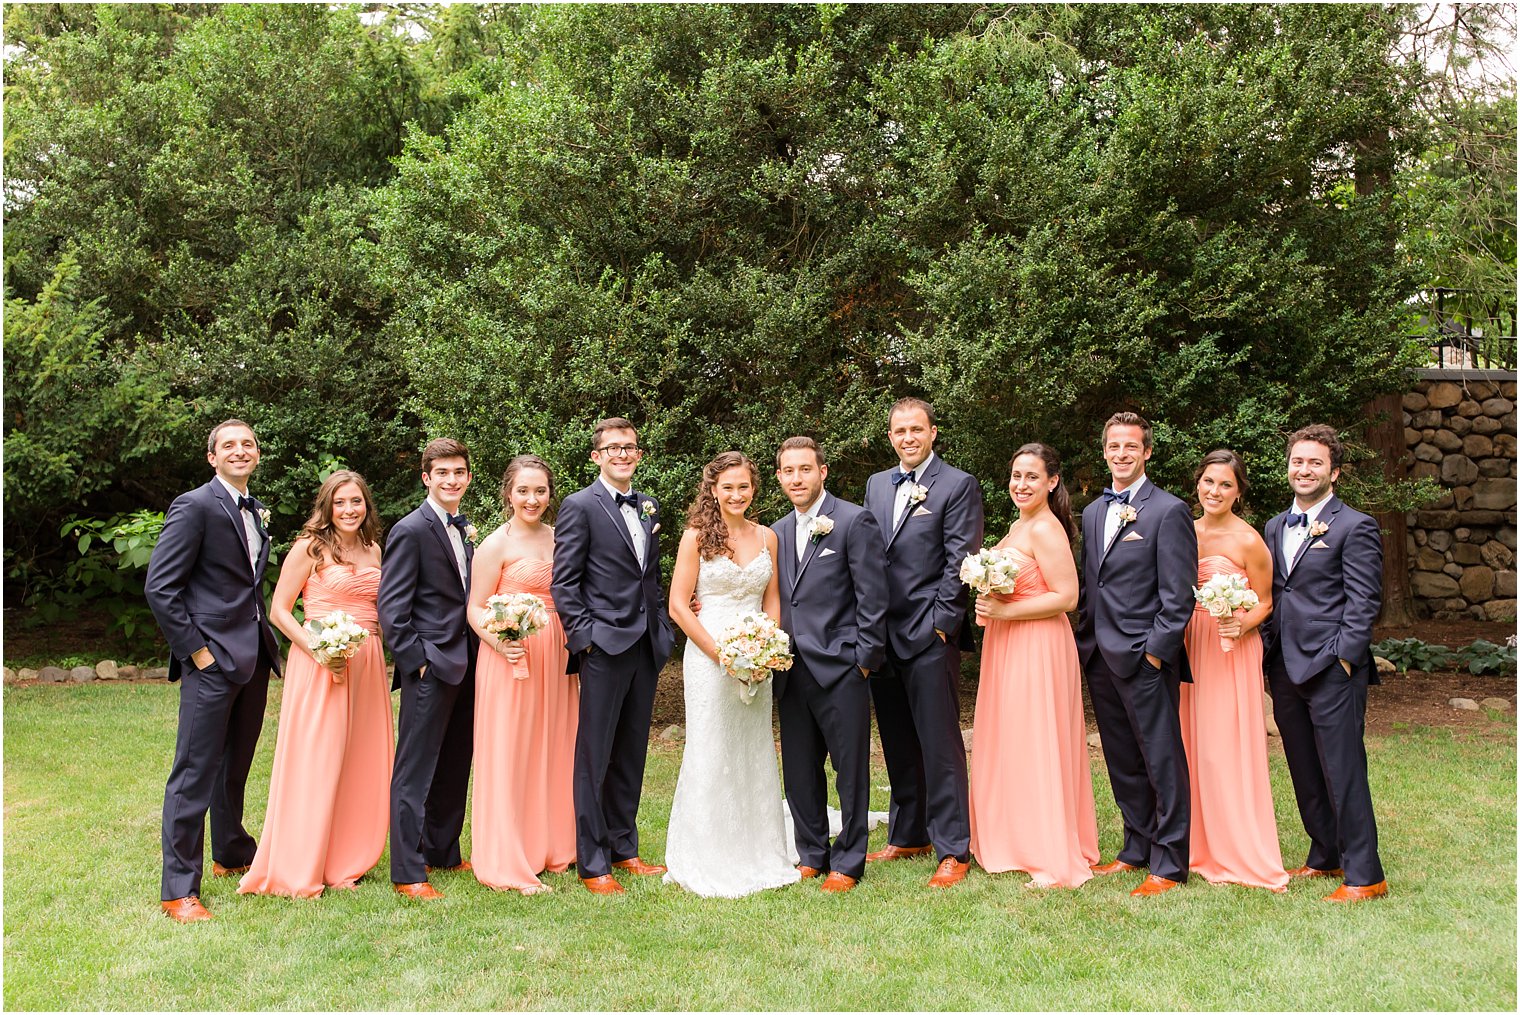 Peach and navy bridal party